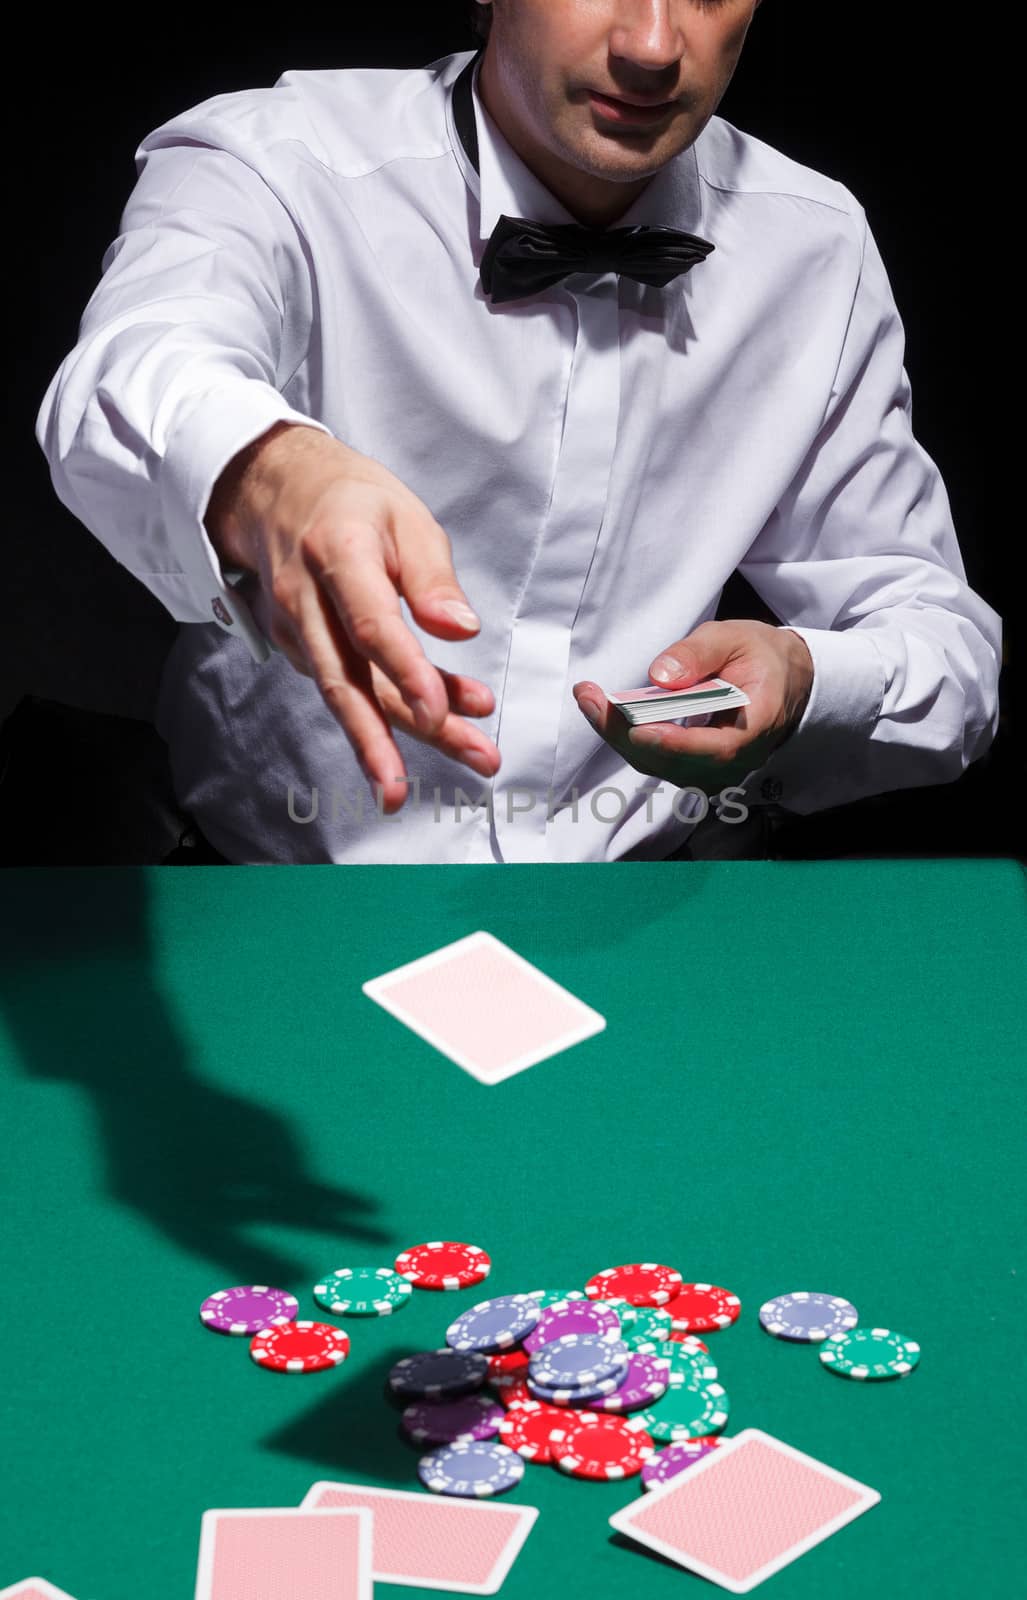 Gentleman in white shirt, playing cards, on black background